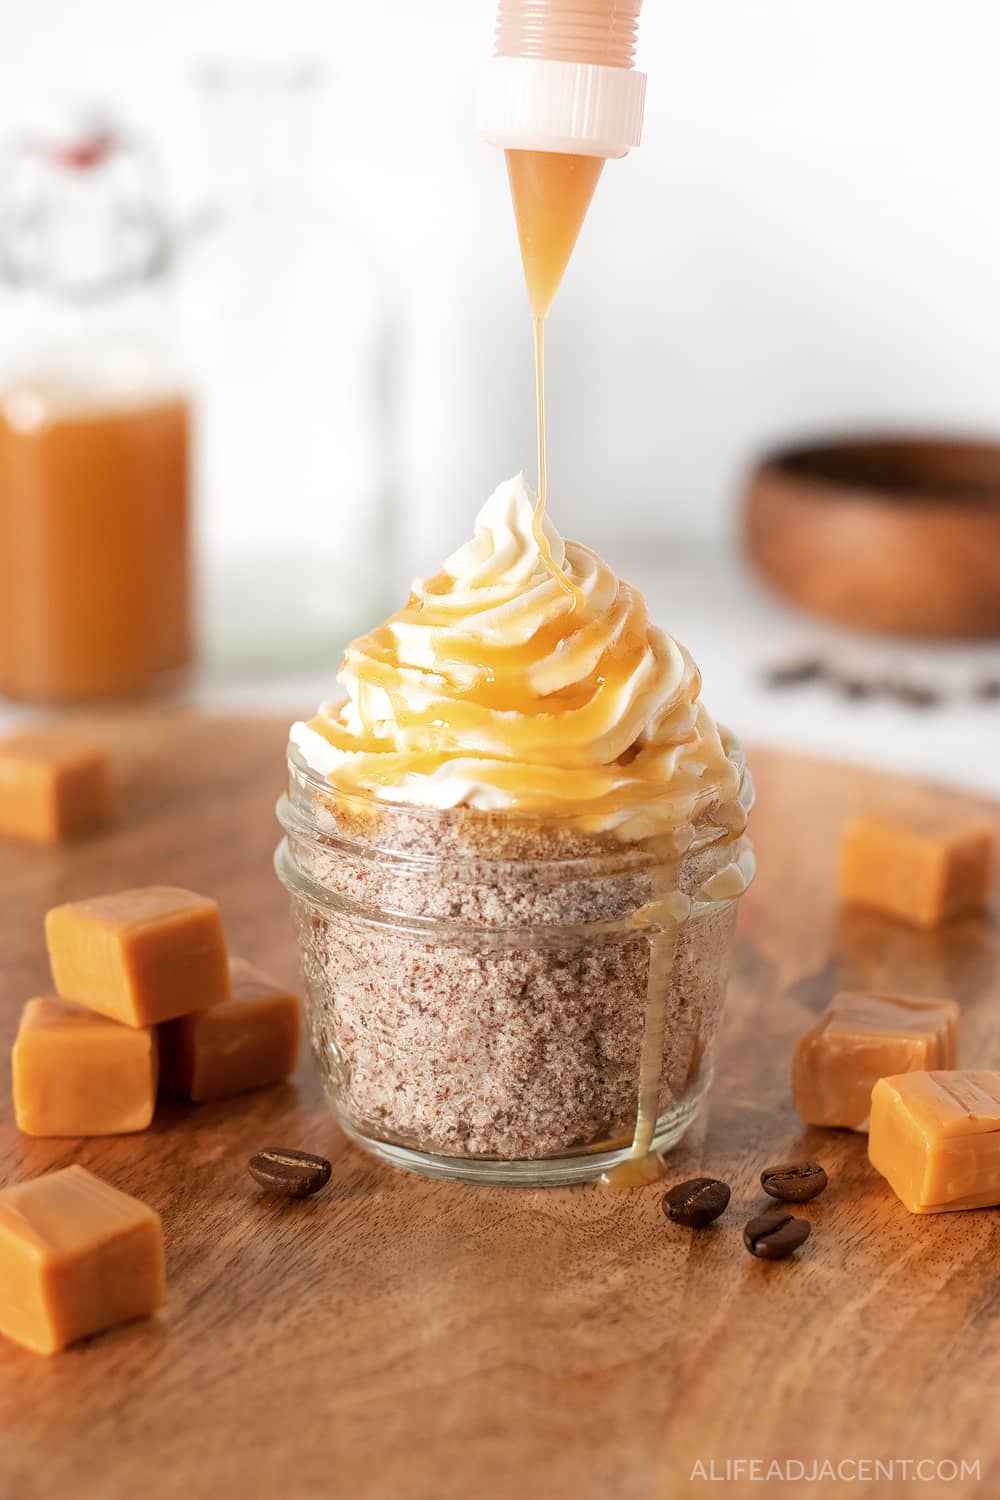 Homemade caramel latte sugar scrub with whipped soap and caramel sauce